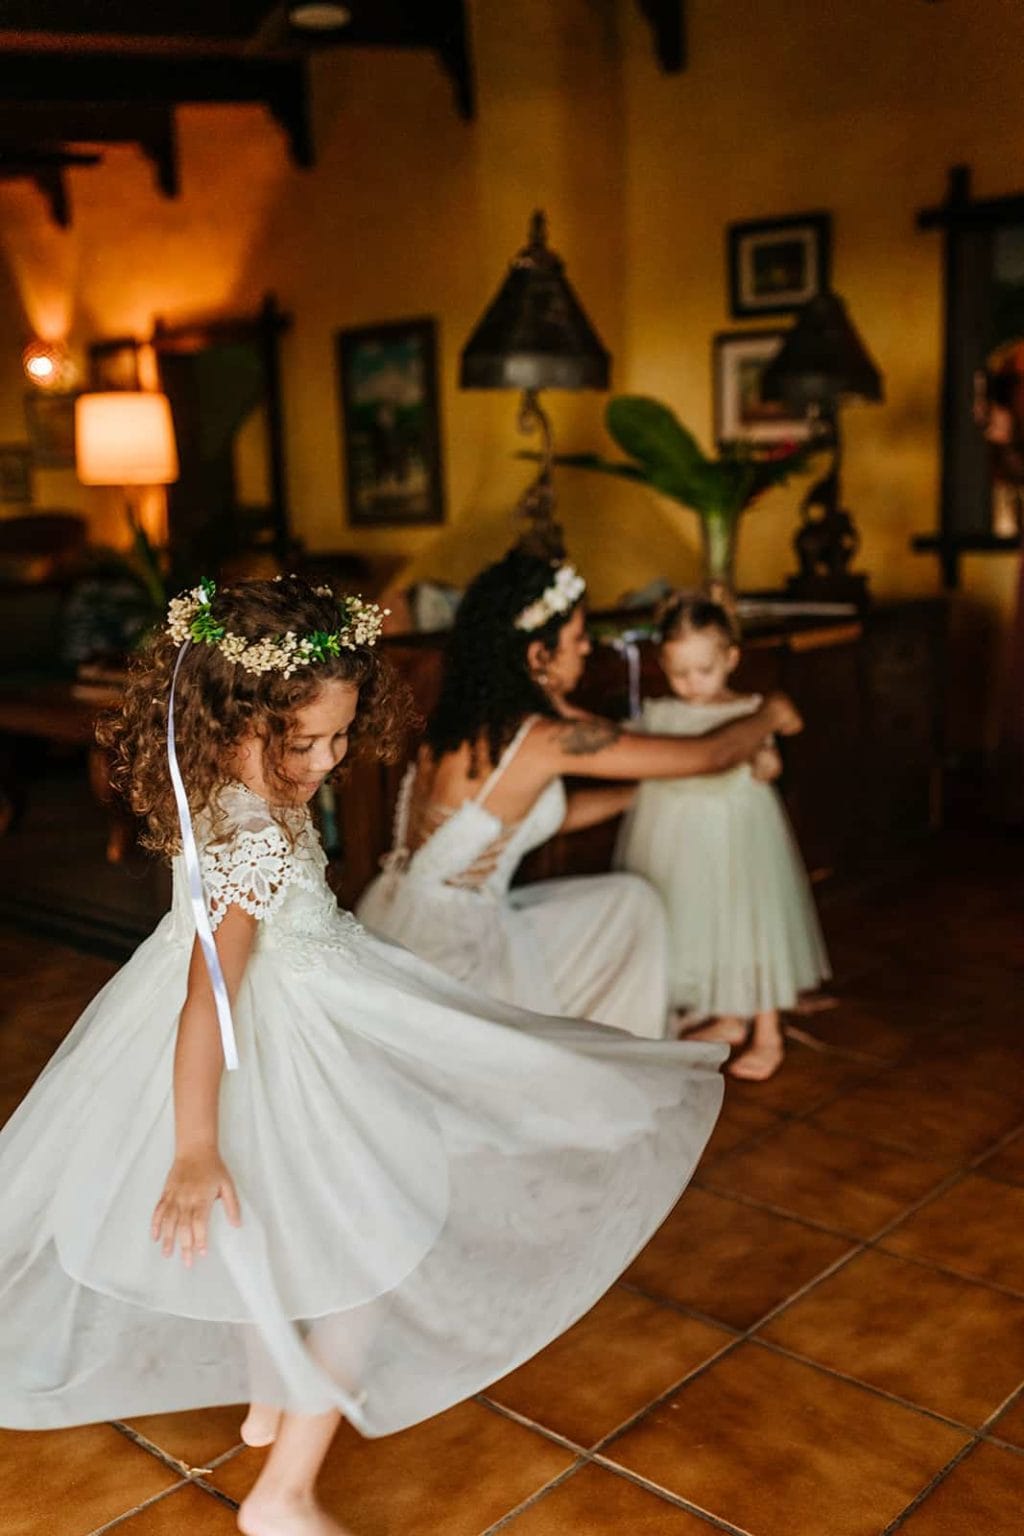 The flower girl spins in her dress before the ceremony.